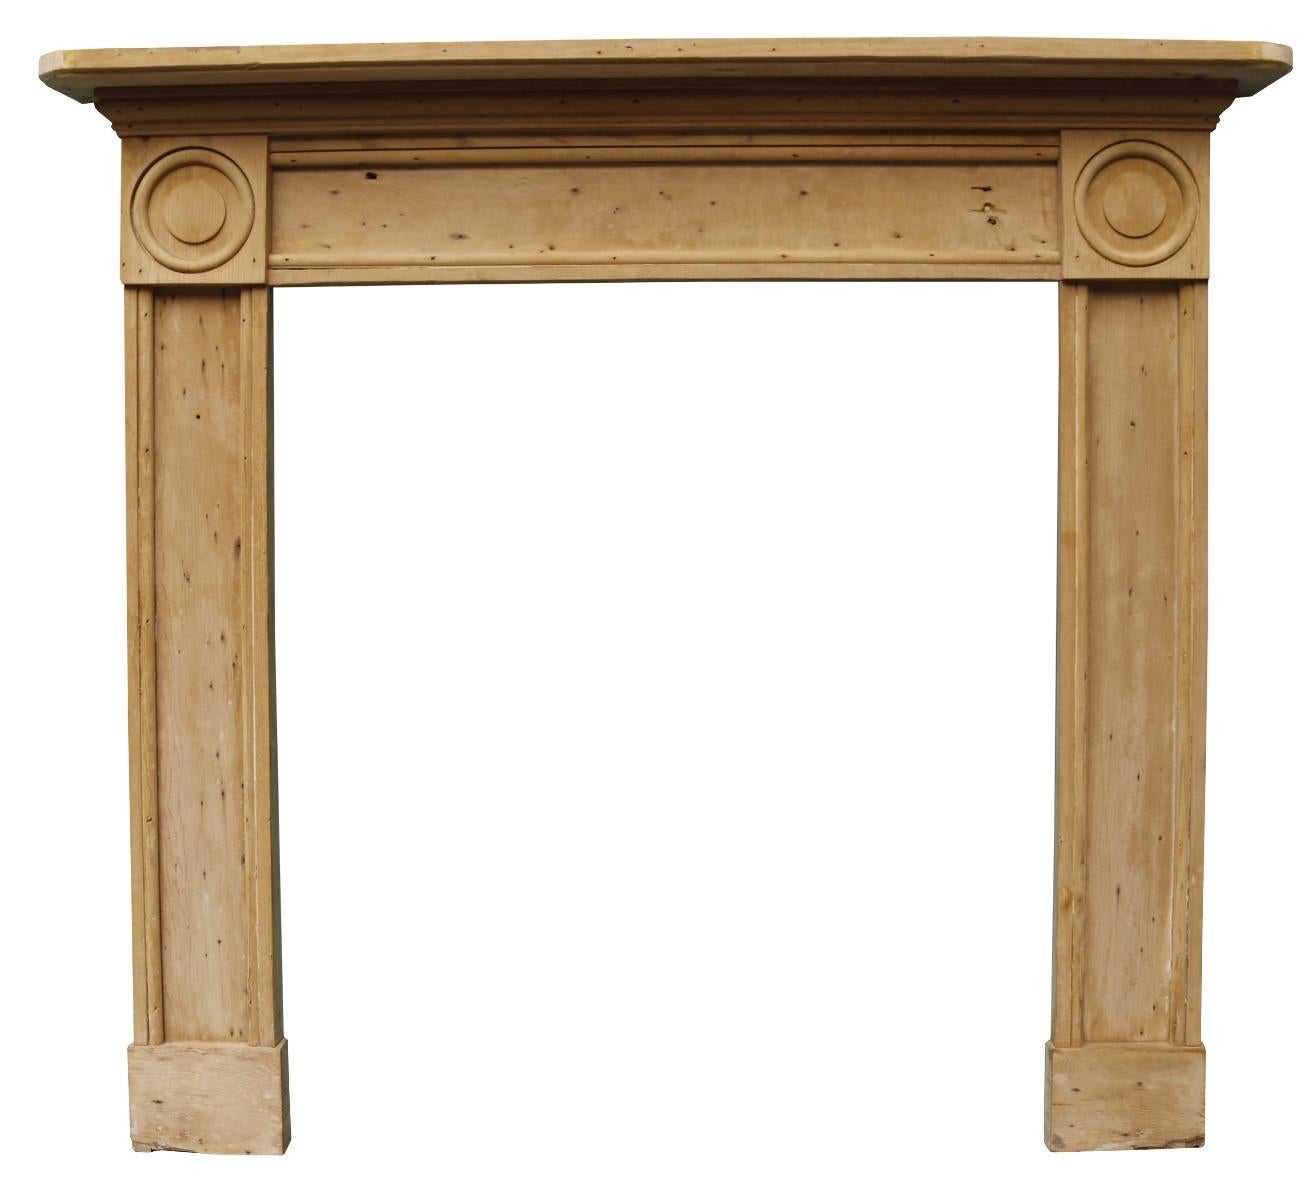 A late Georgian Bulls-eye style fire surround, reclaimed a farmhouse in Norfolk.

We have two of these surrounds available.

Additional dimensions:

Opening height 96.5 cm

Opening width 86.5 cm

Width between outside of the foot blocks